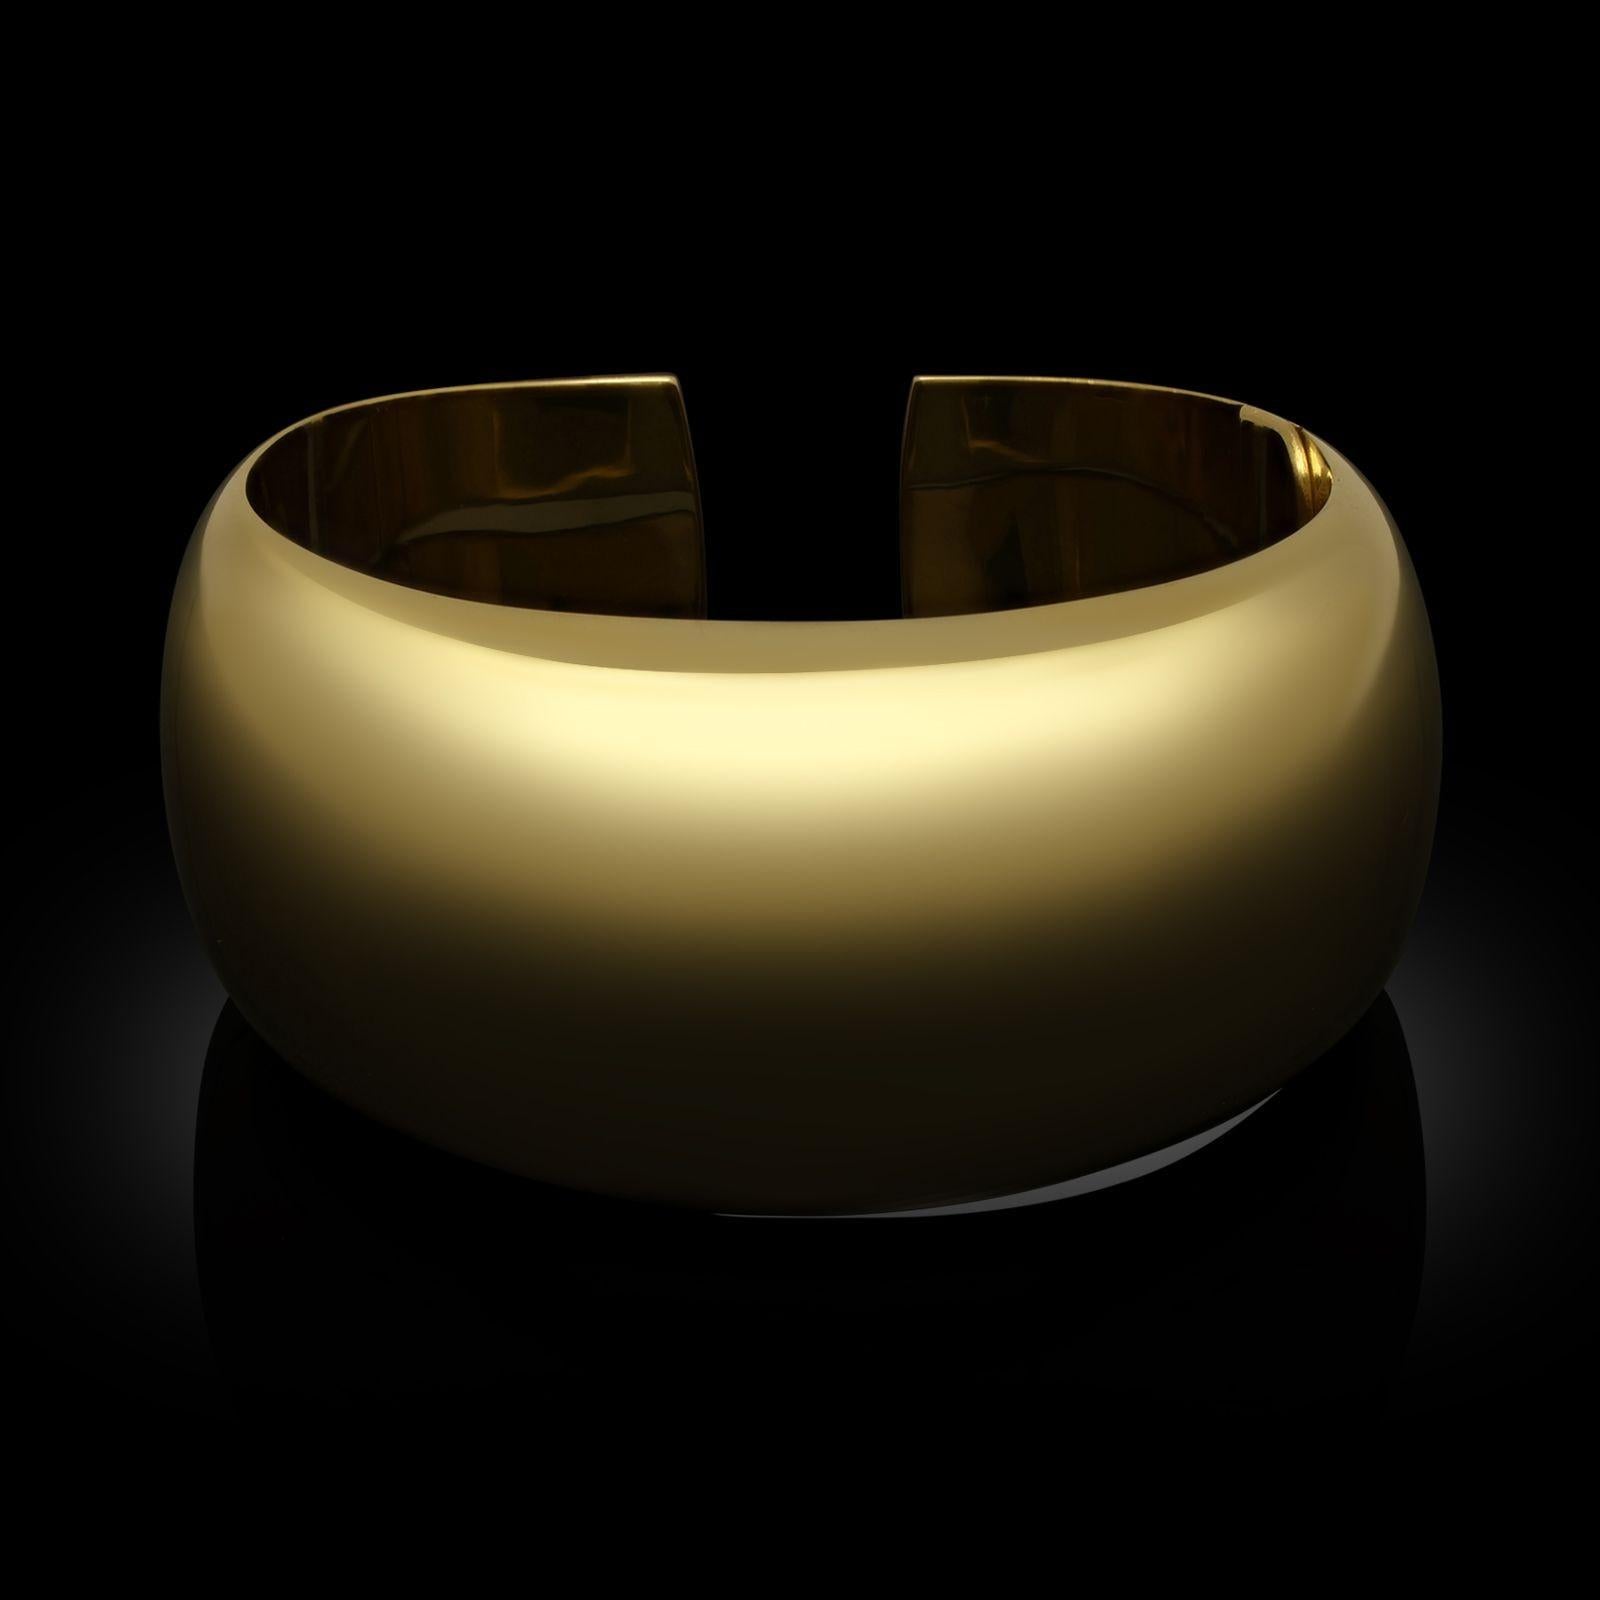 A gold cuff bracelet made by Carlo Weingrill for Tiffany & Co. circa 2000. The cuff is designed with a domed profile that tapers to the back, all in polished 18ct yellow gold and with a discreet hinge to one side.
Maker
Tiffany & Co. made by Carlo